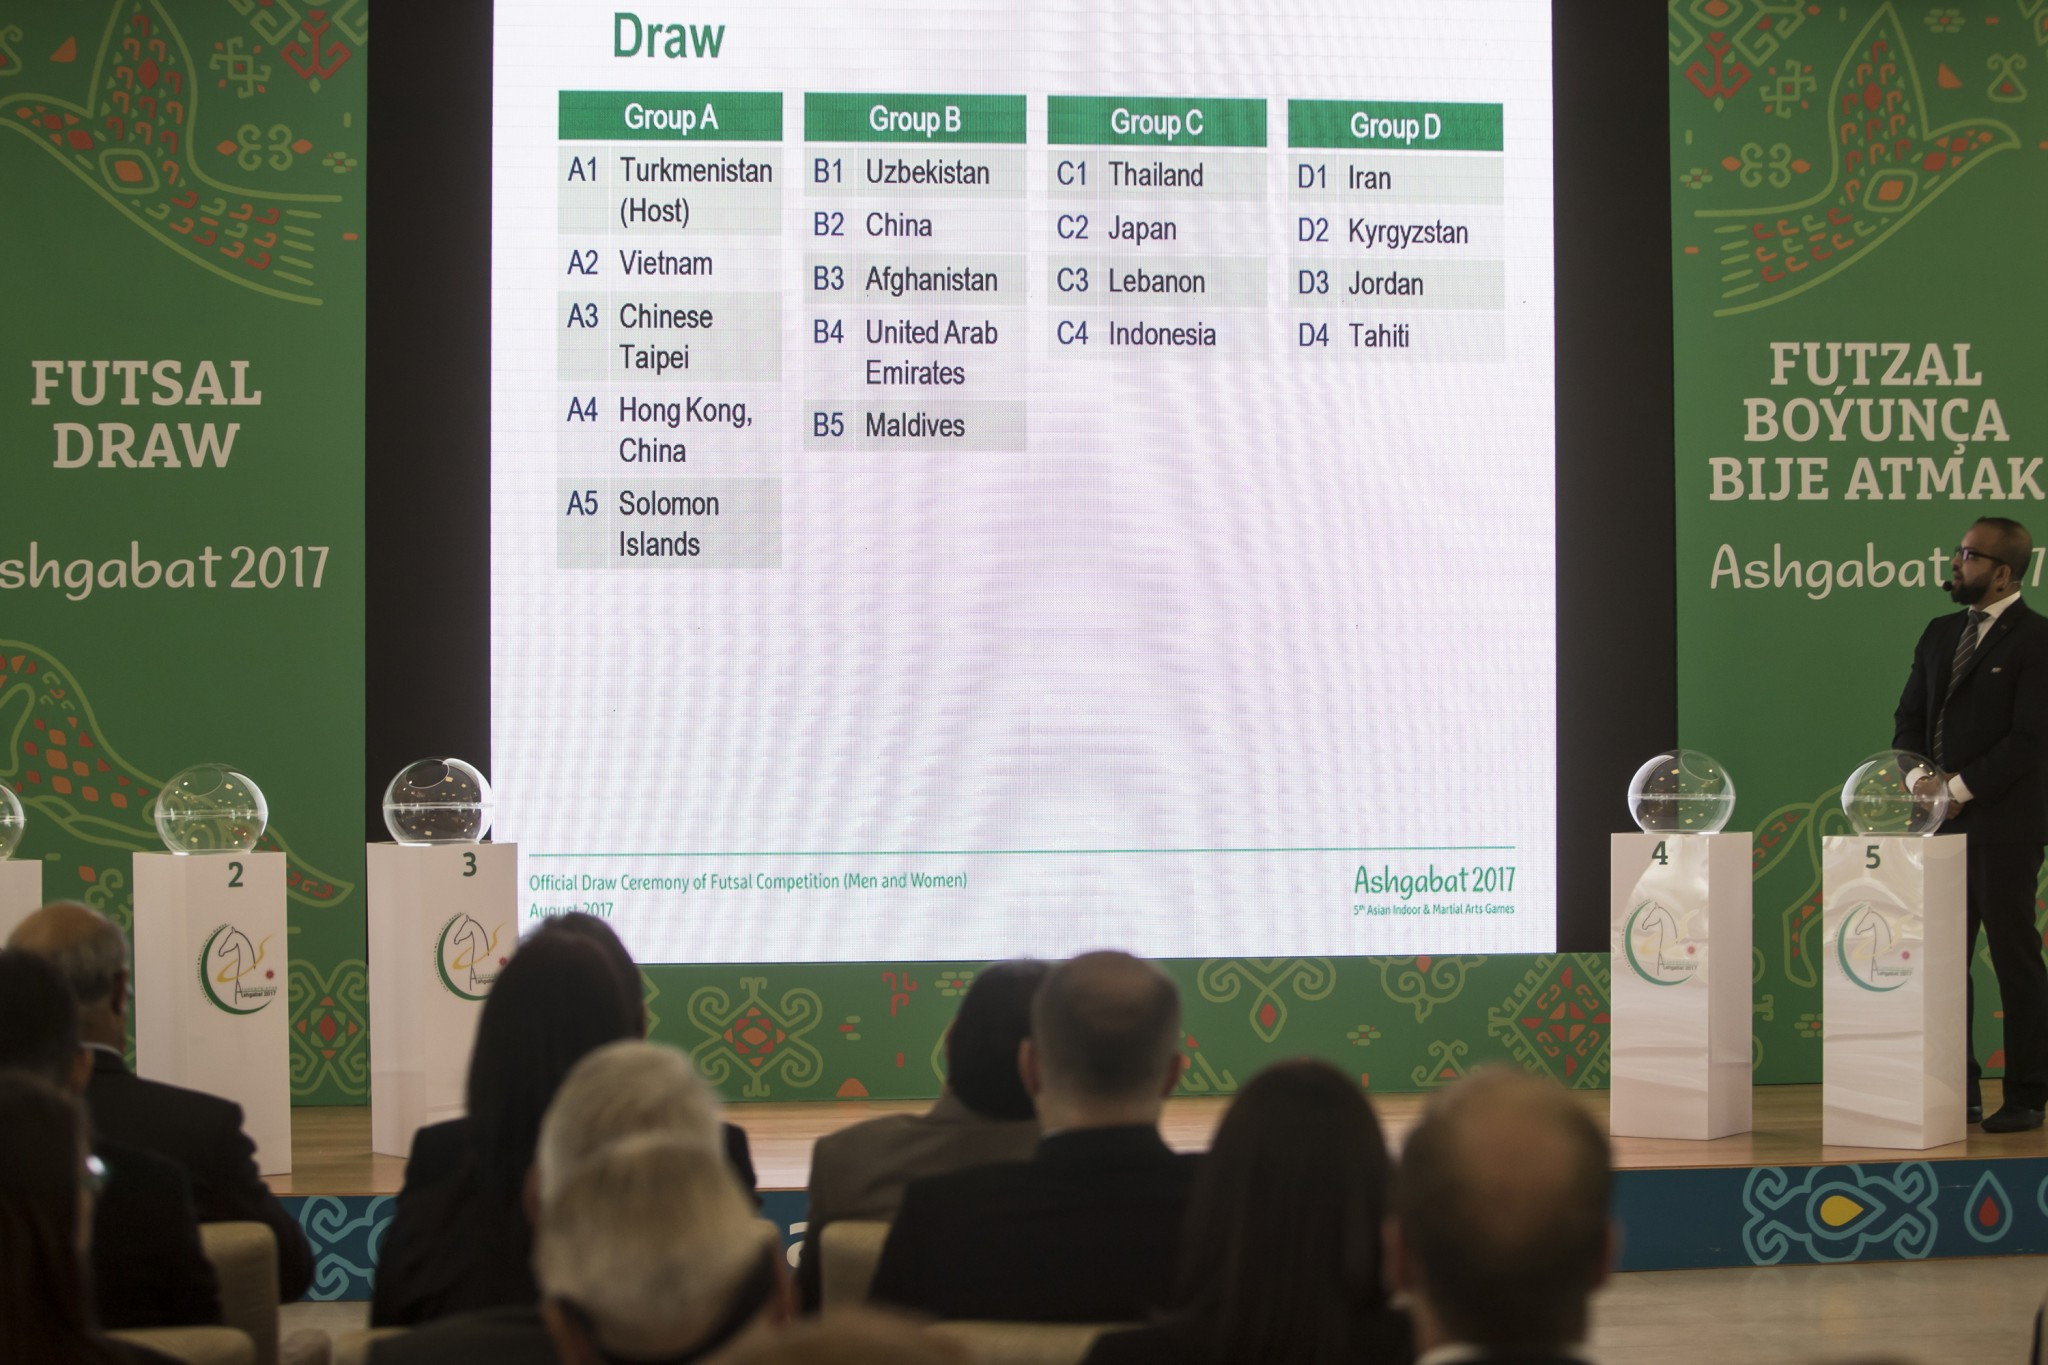 Organisers have conducted the draw for the futsal tournament ©Ashgabat 2017